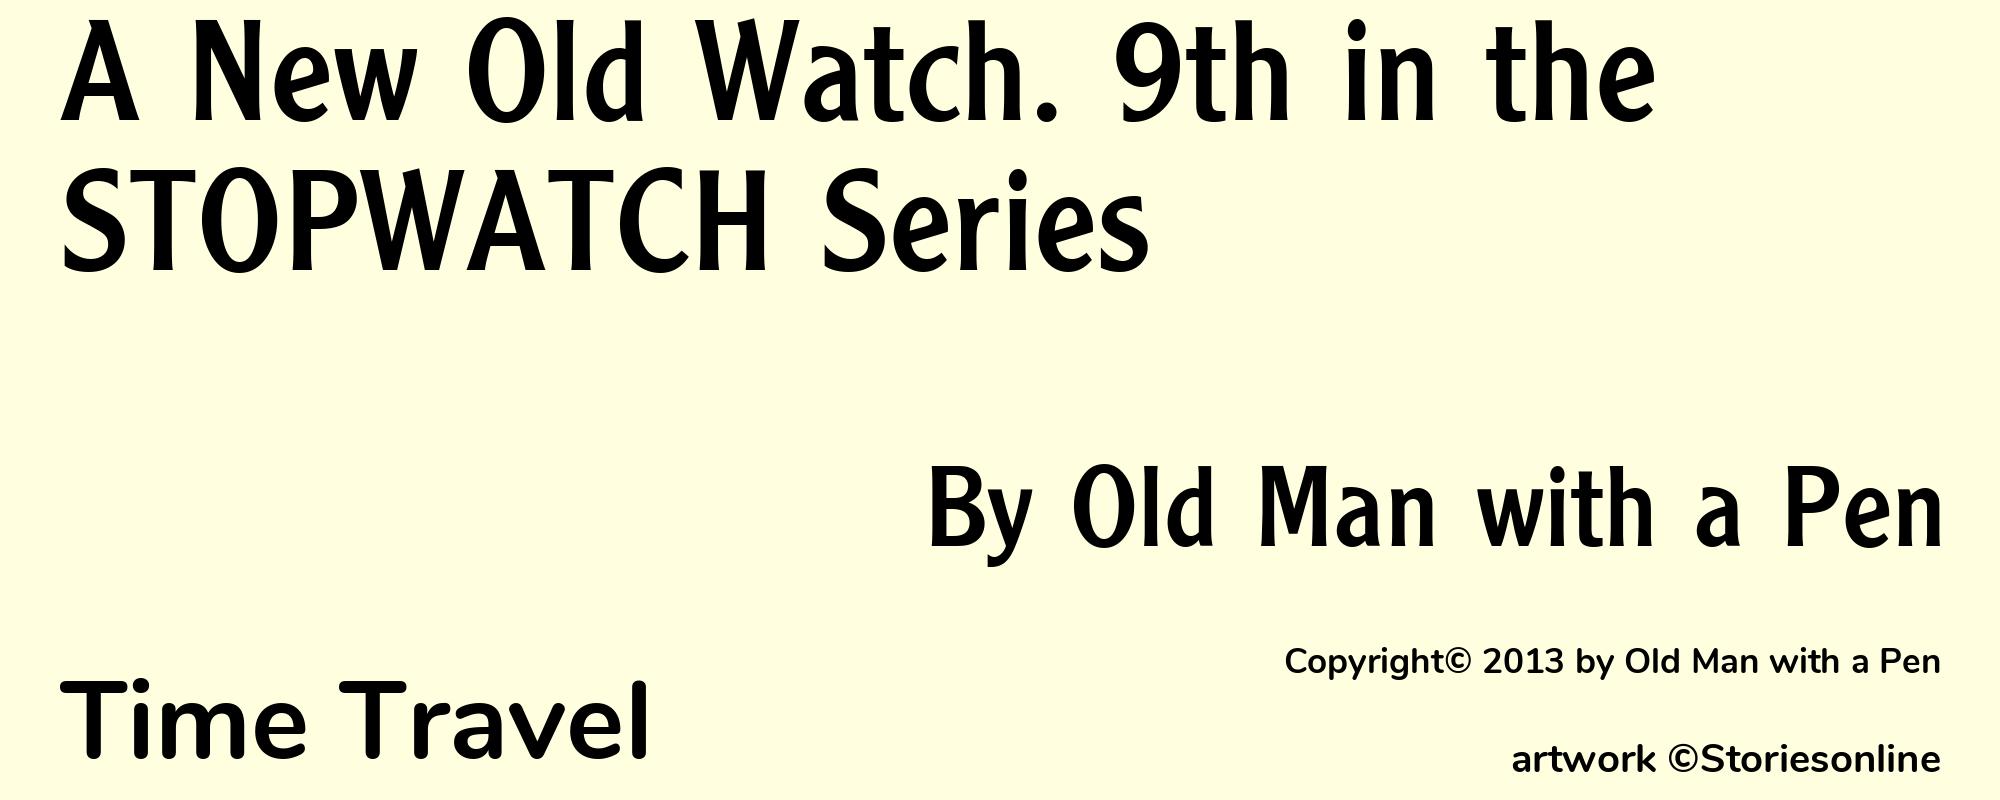 A New Old Watch. 9th in the STOPWATCH Series - Cover